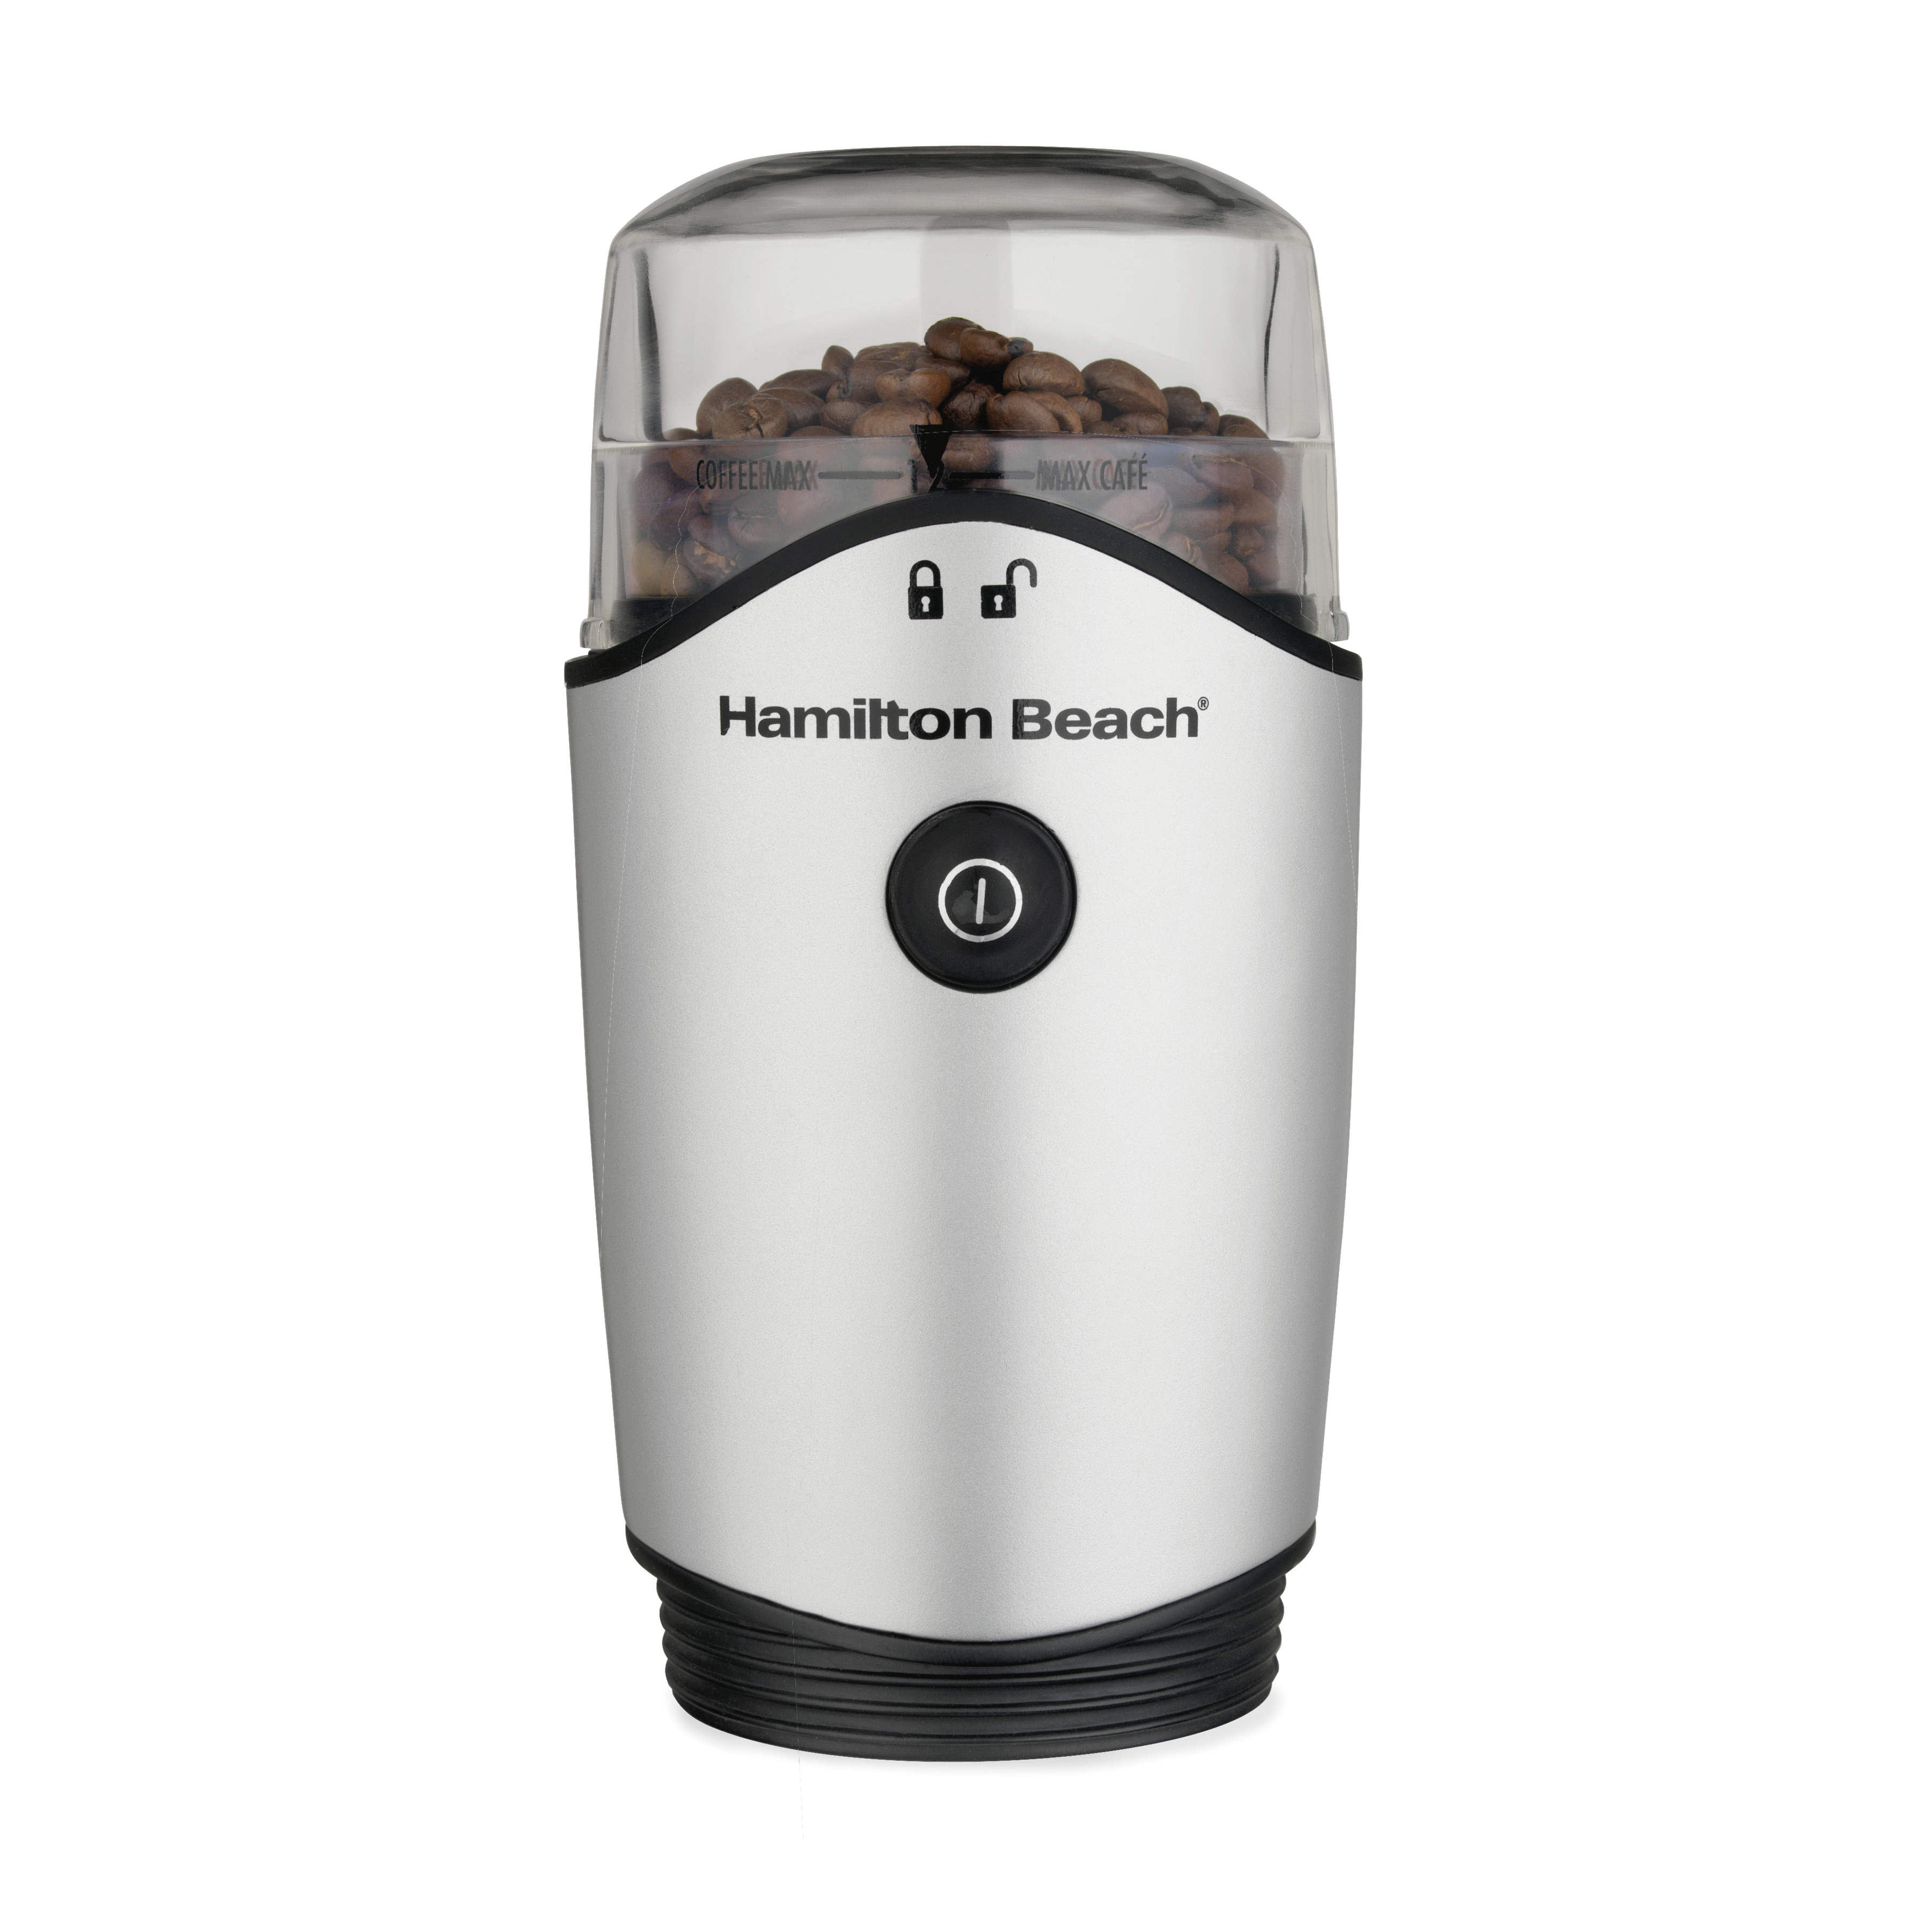 Hamilton Beach 12 Cup Electric Coffee Grinder, Stainless Steel and Black, New, 80350R - image 1 of 6